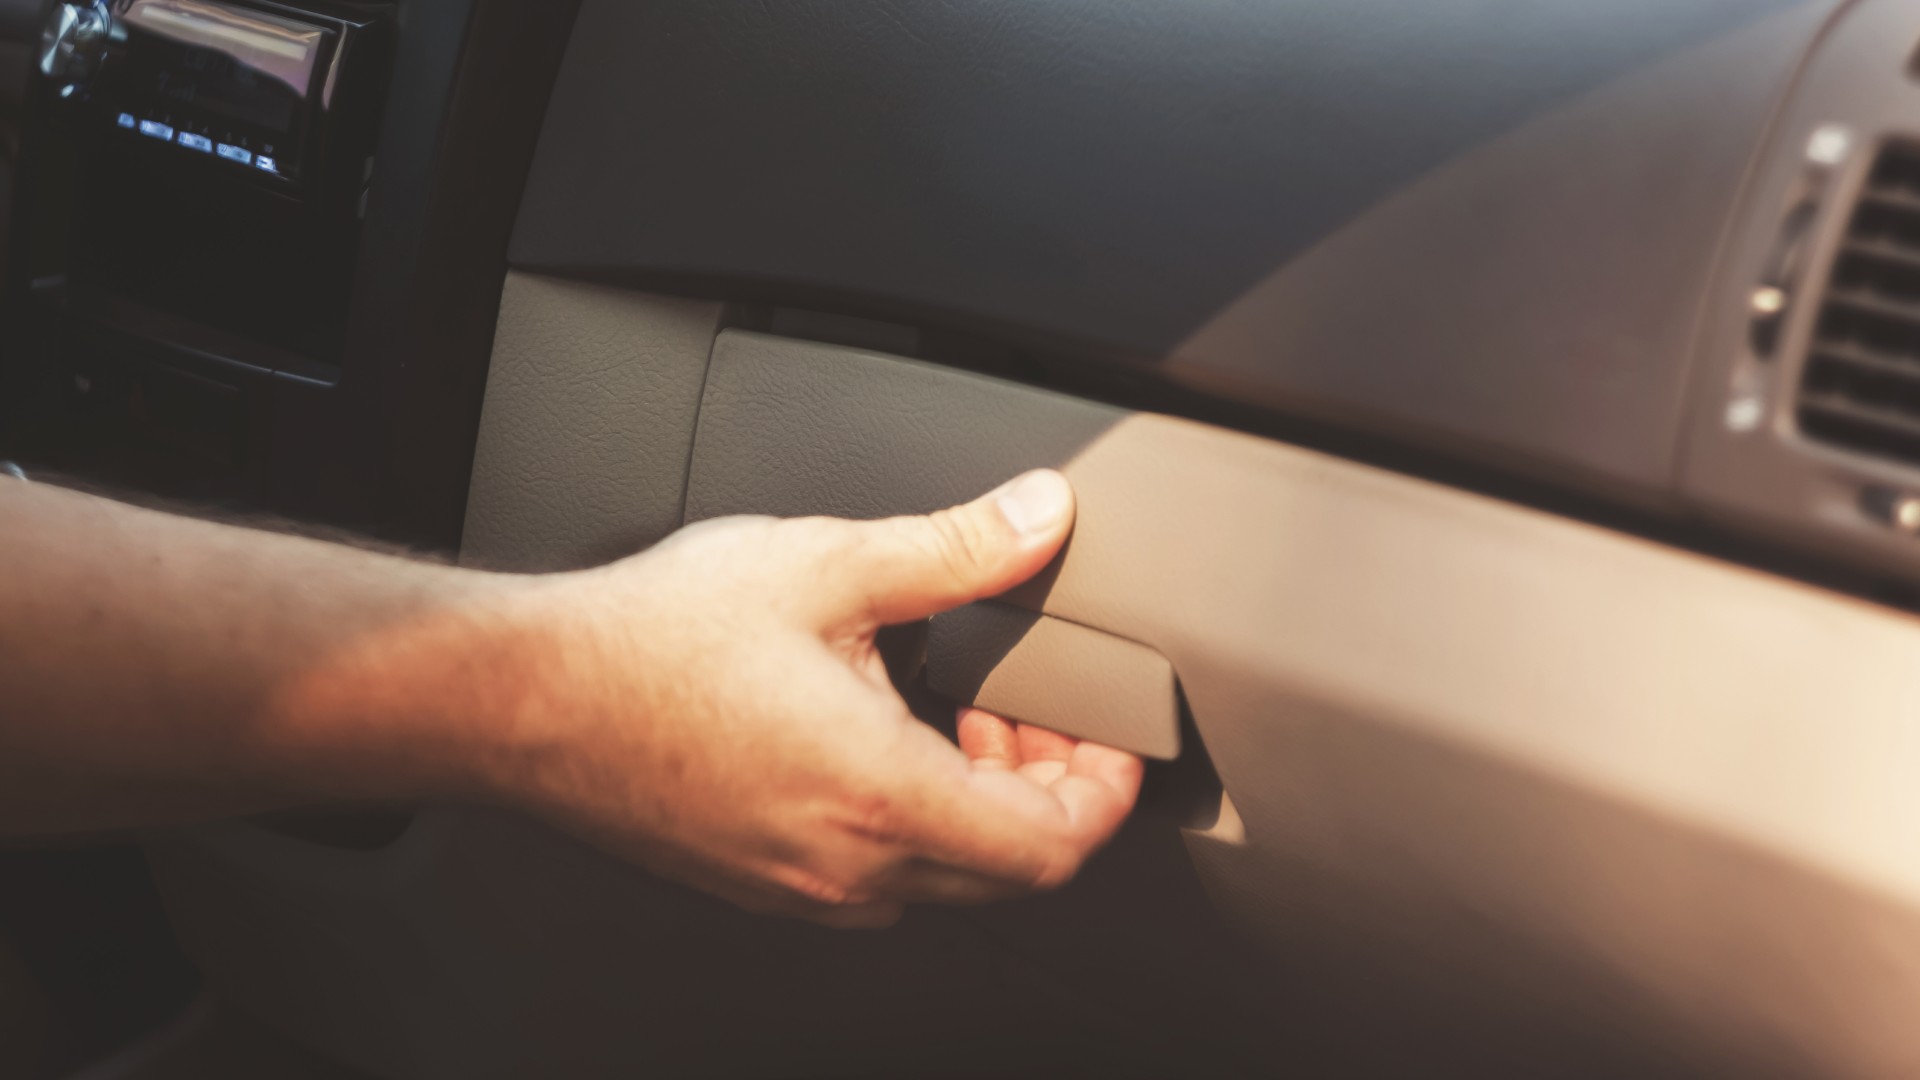 a person opens a car glove compartment to look for jewelry